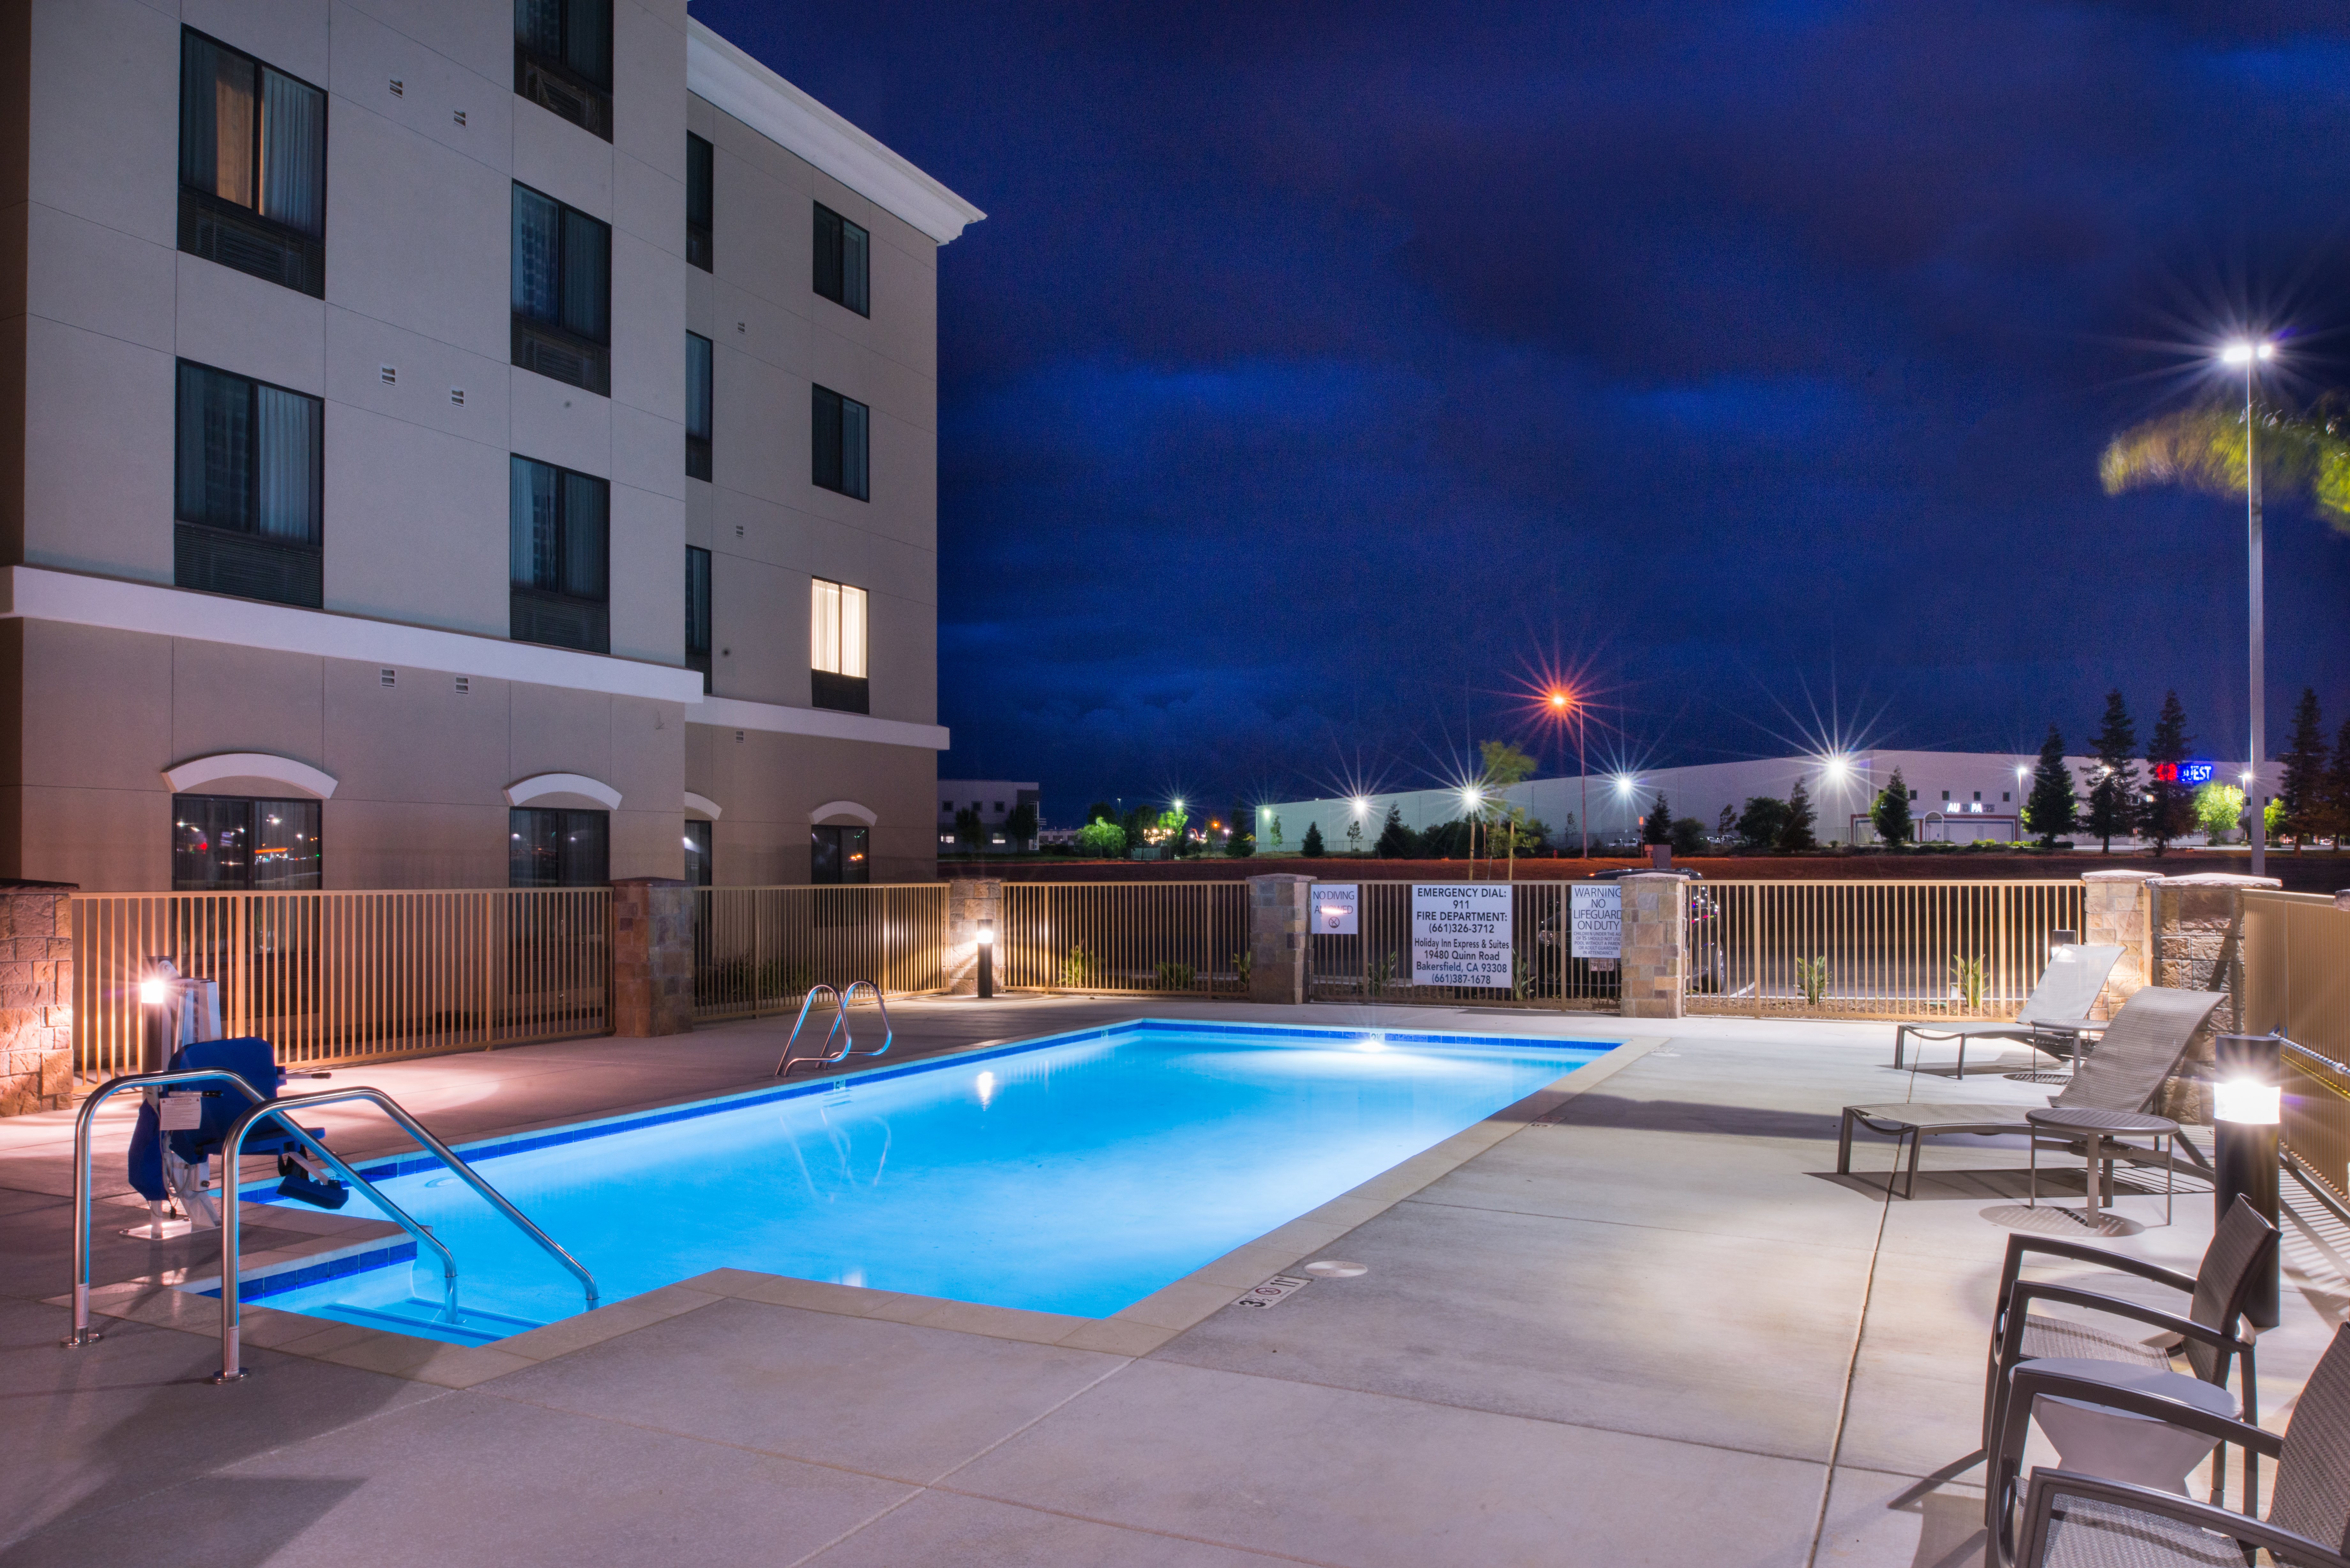 Chill by the pool at our North Bakersfield hotel!